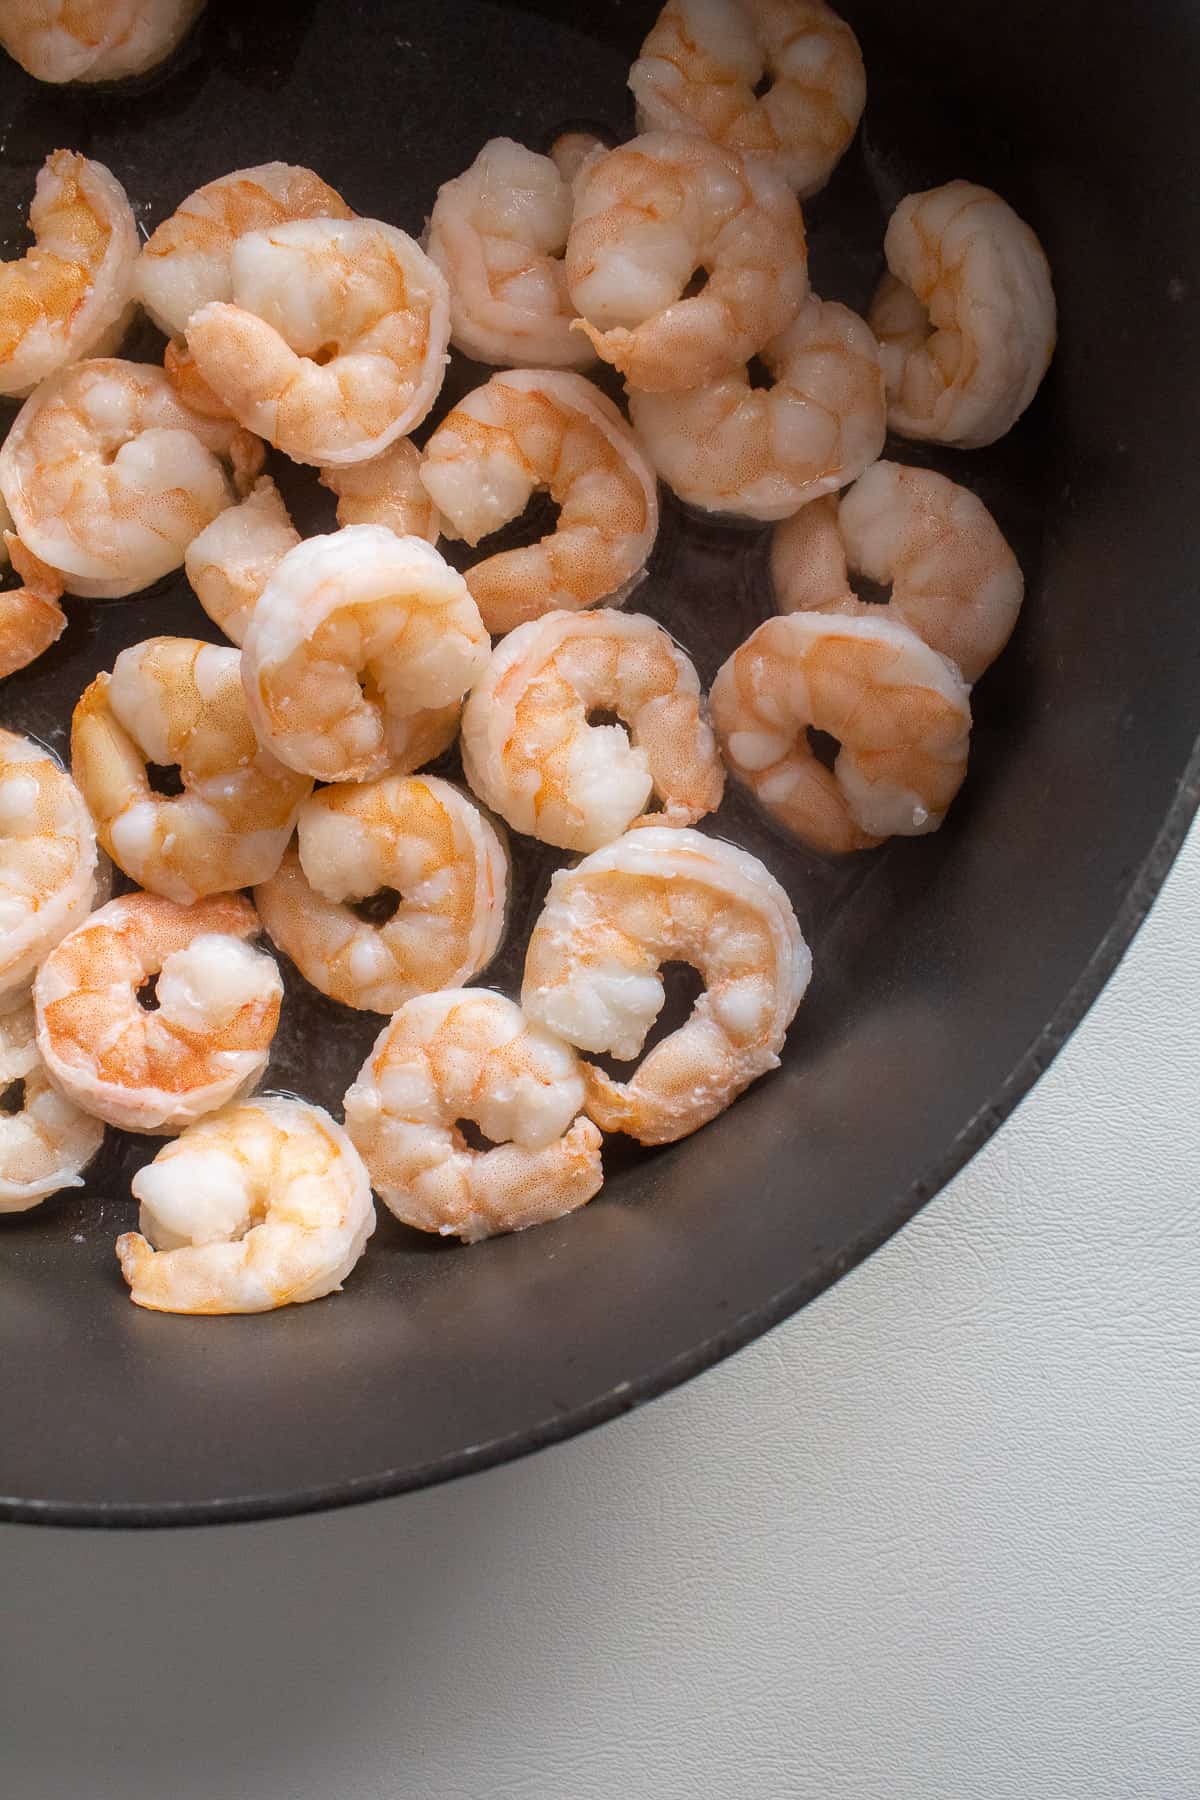 Whole cooked shrimp sit in the bottom of a dark frying pan.